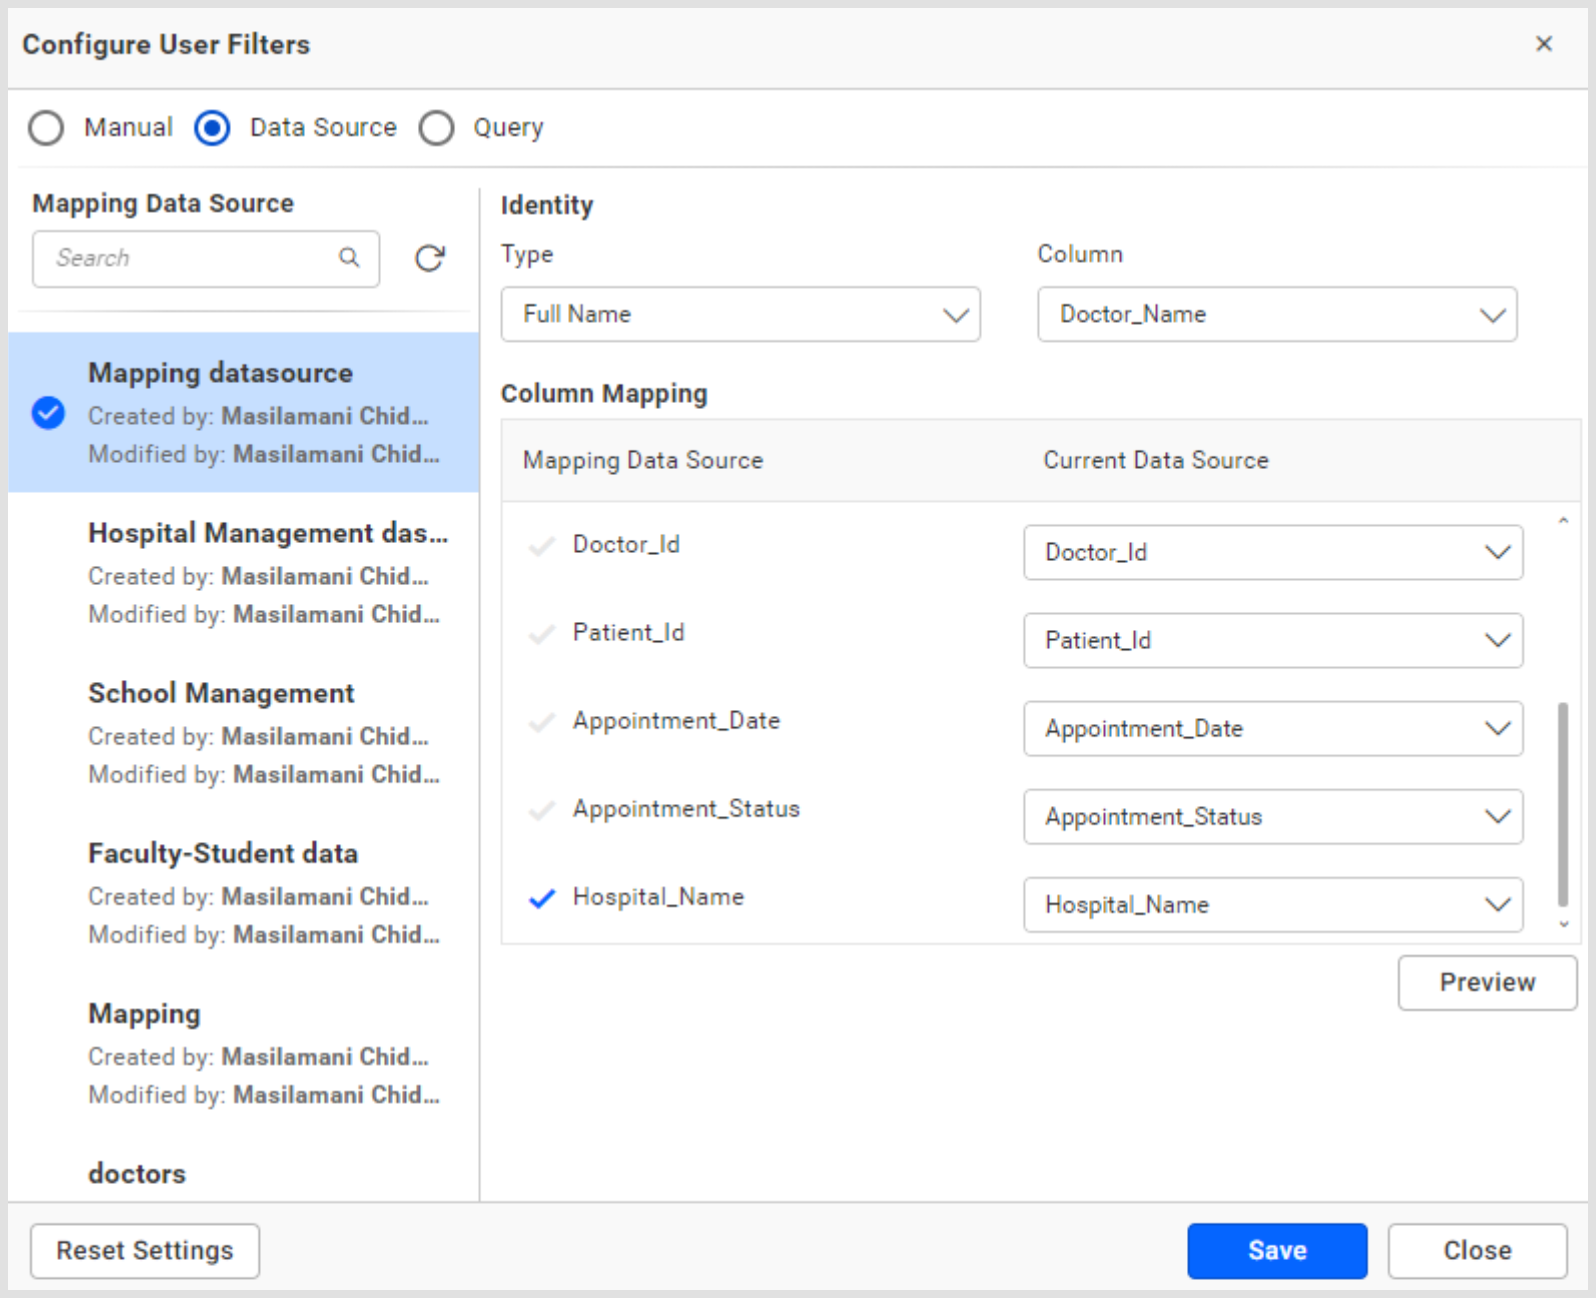 Configuring User Filter in Data Source Mode